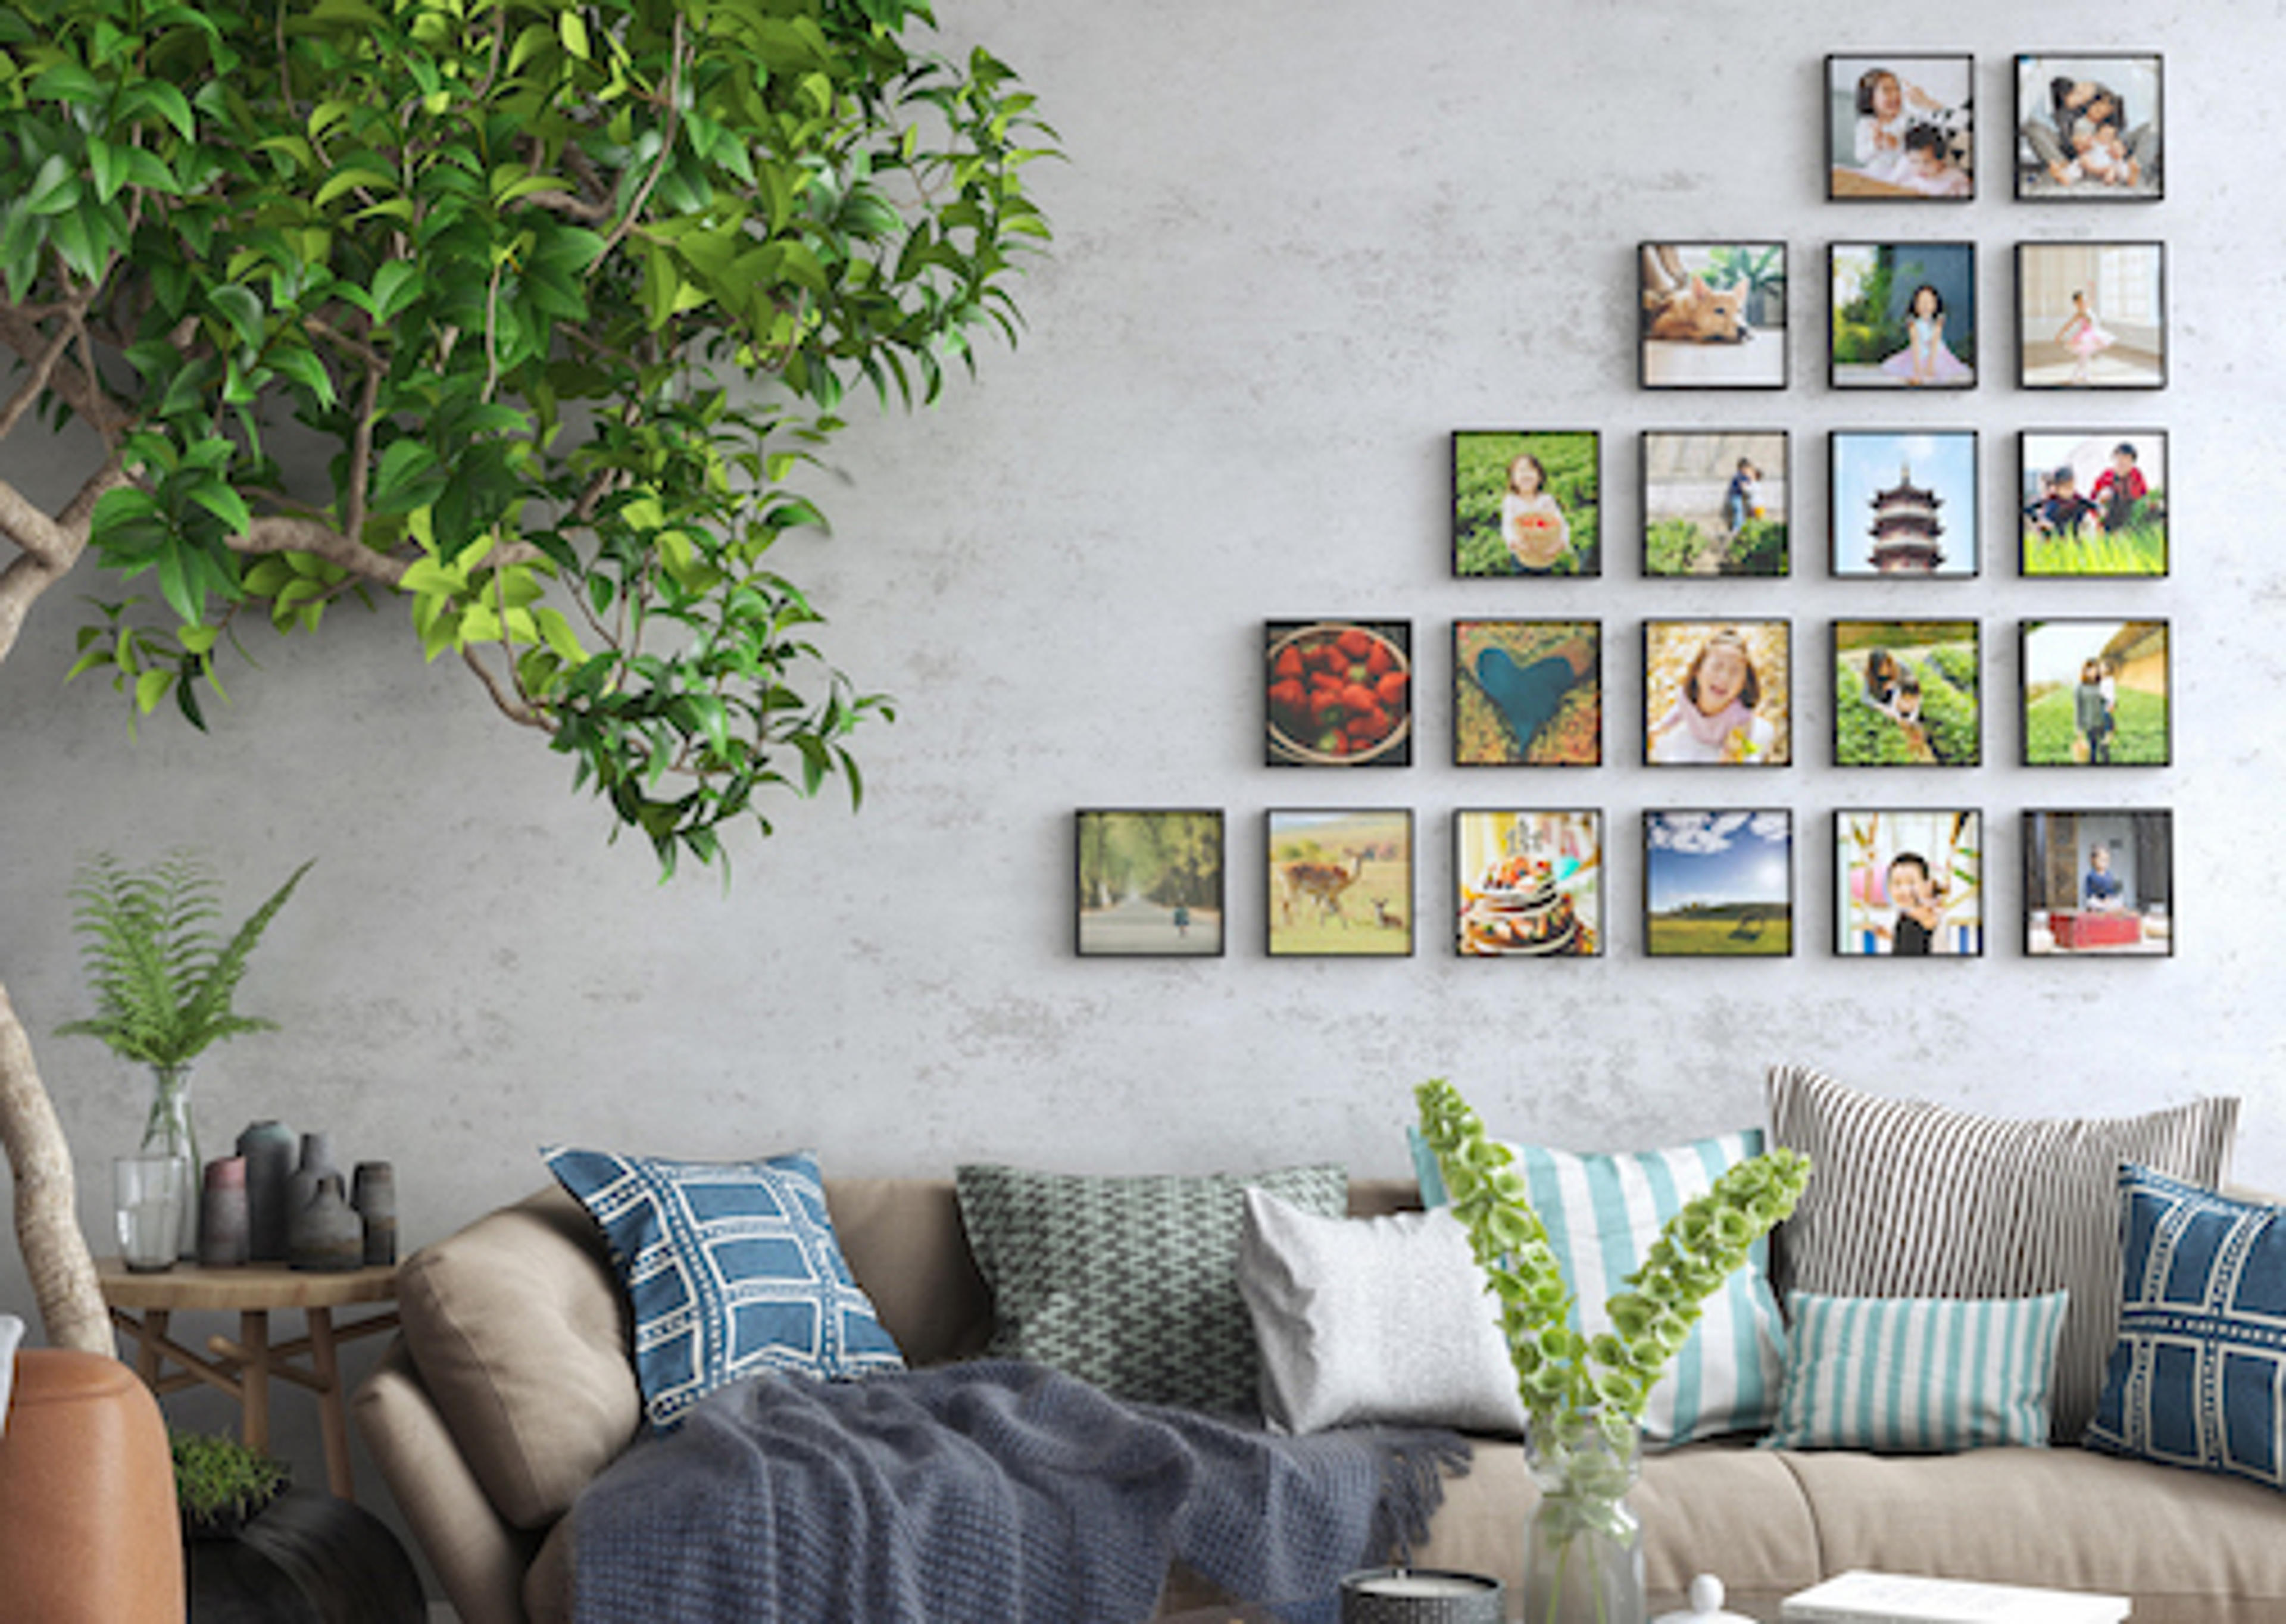 Turn your photos into affordable, stunning wall art